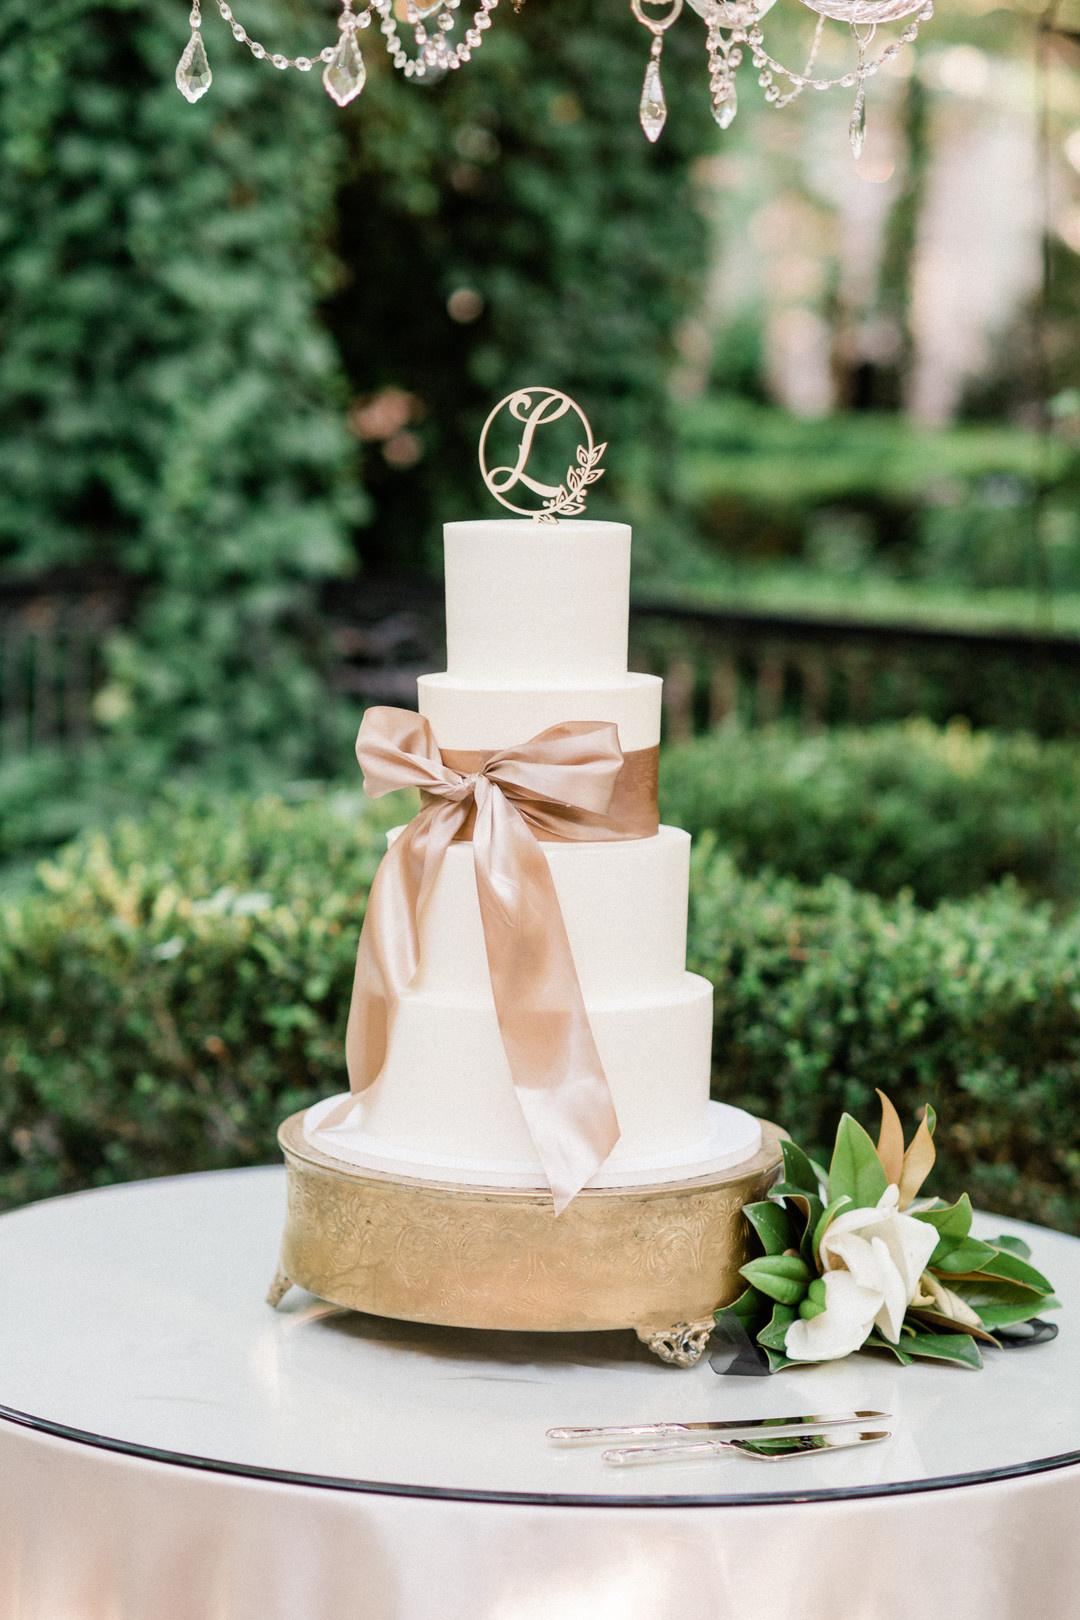 Charlotte Photographer: Featuring Wedding Cakes from Dominica @ Nona's  Bakery | Priscilla Green Photography